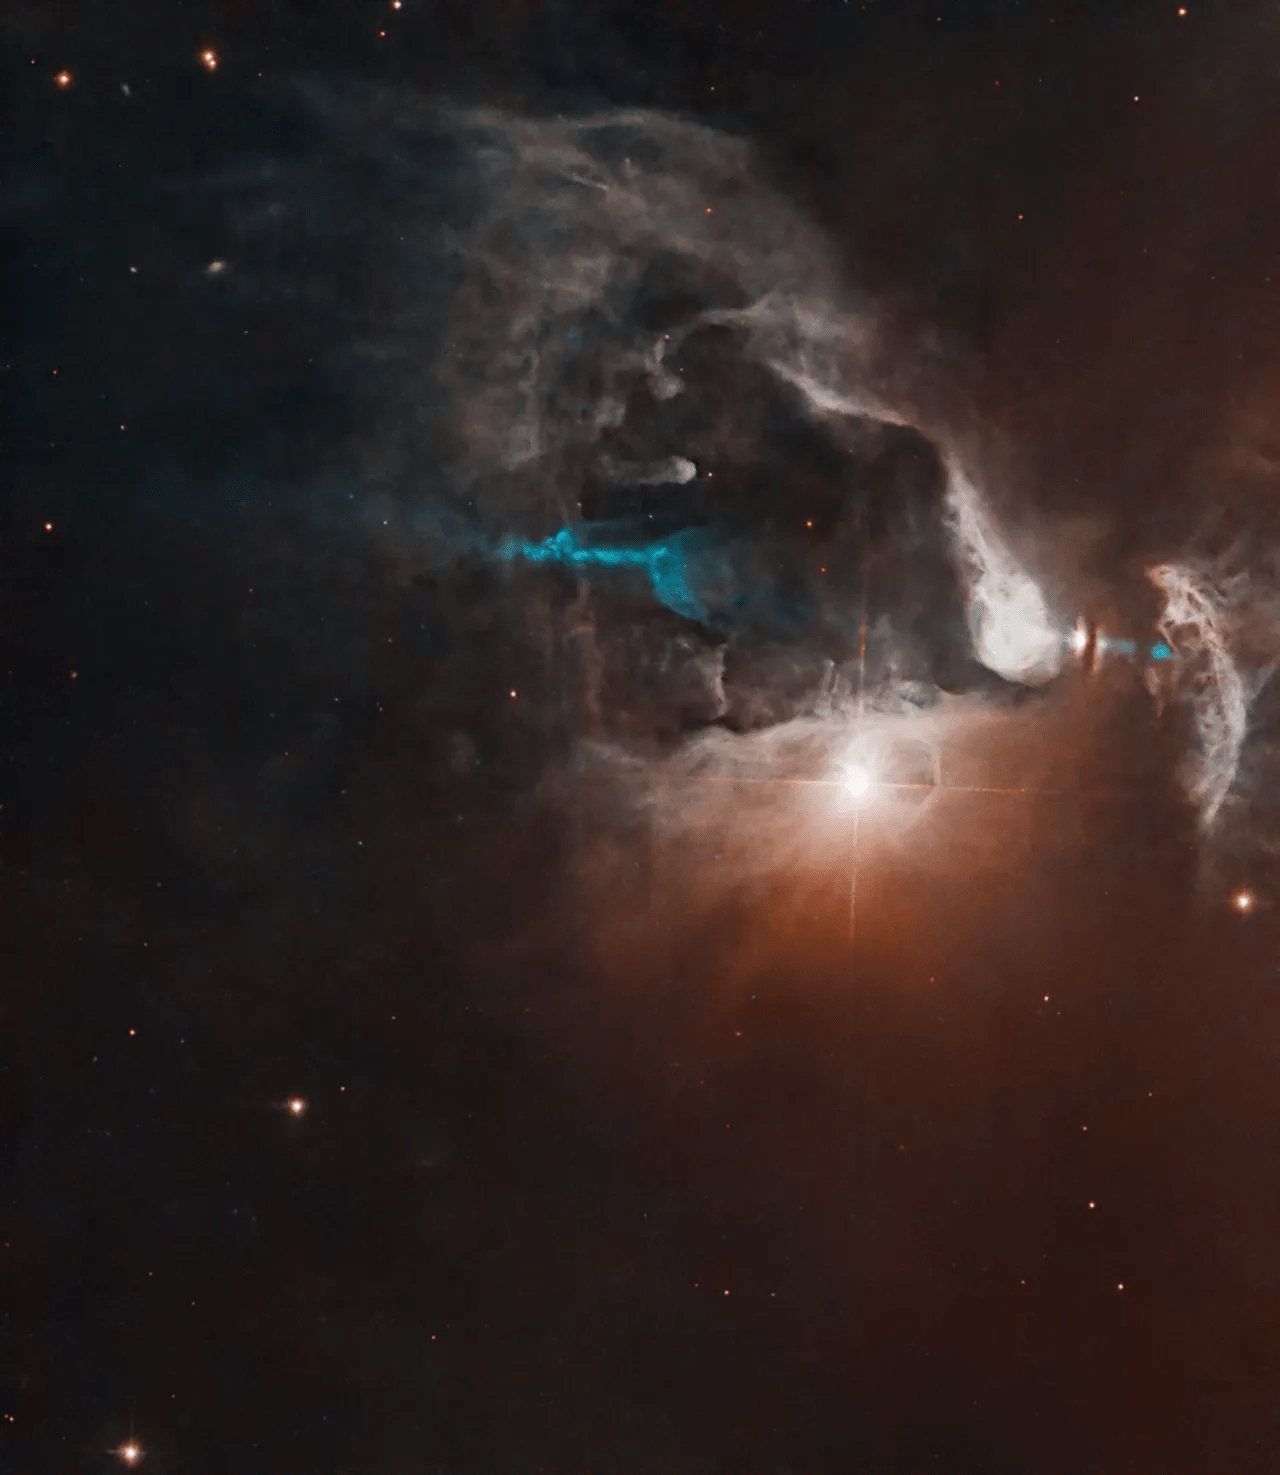 Hubble Sees New Star Proclaiming Presence with Cosmic Lightshow